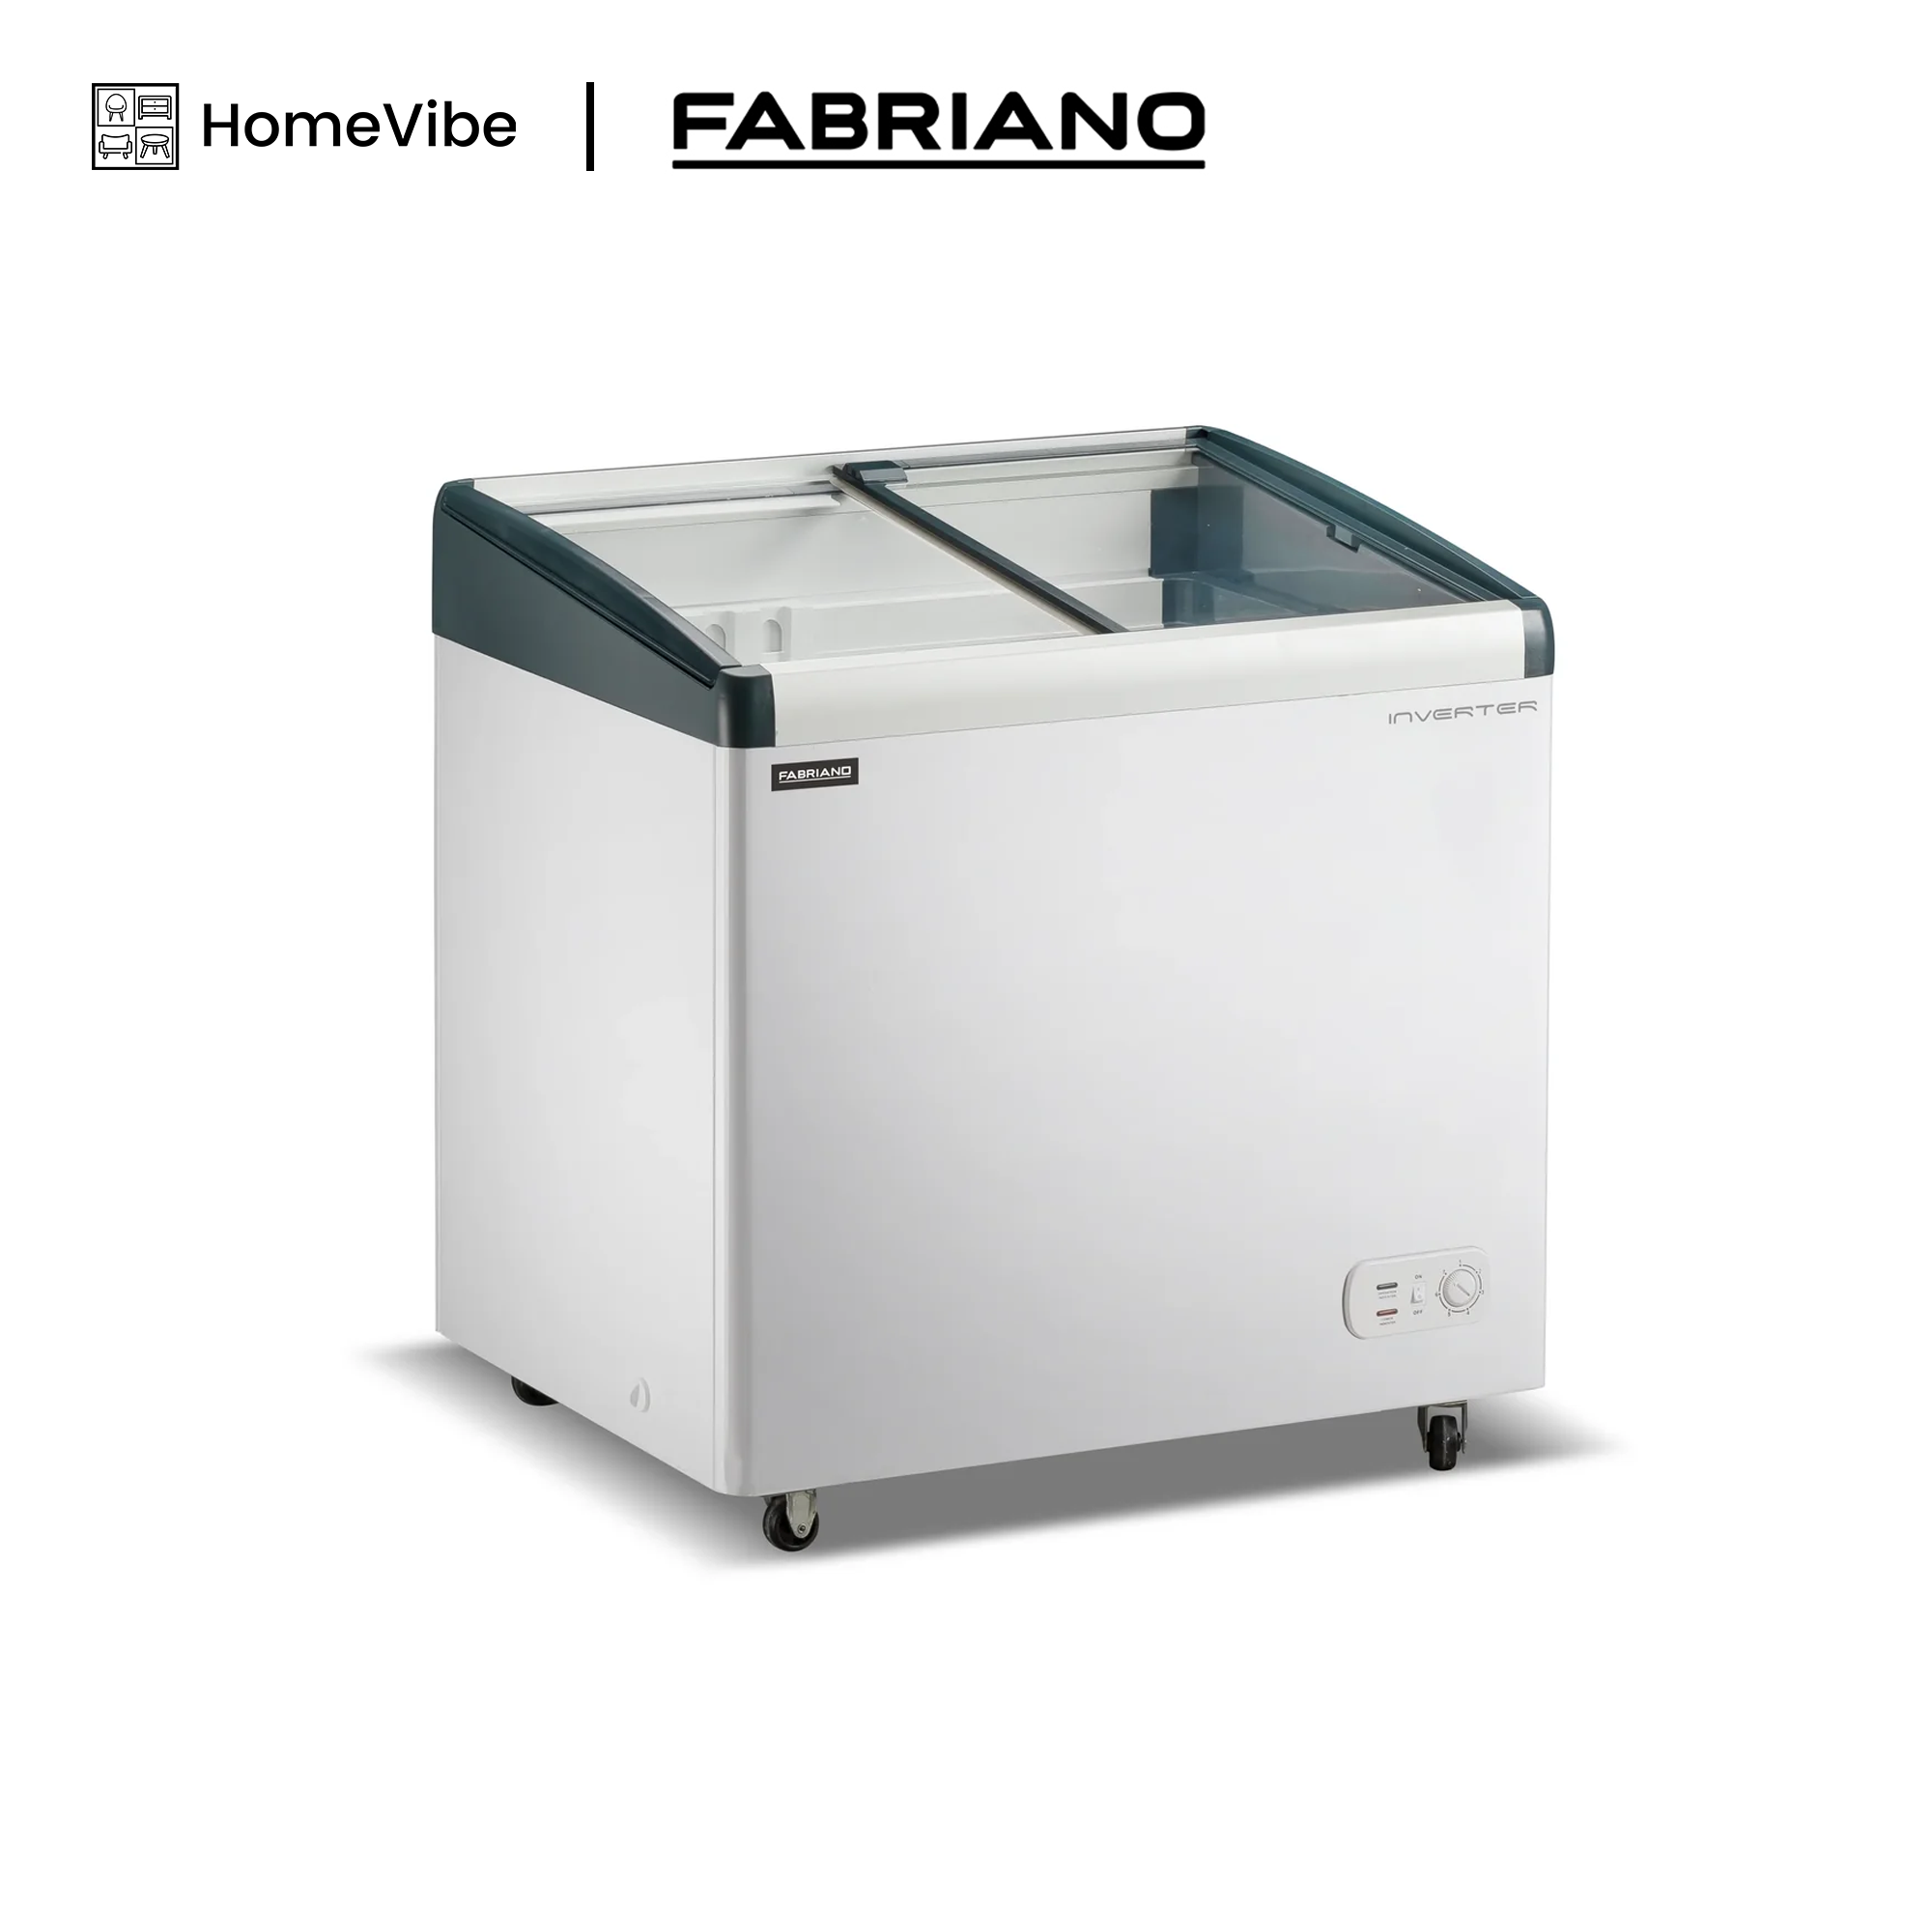 Fabriano 9cuft INVERTER Showcase Dual Function Chest Freezer FGTC09SG-I